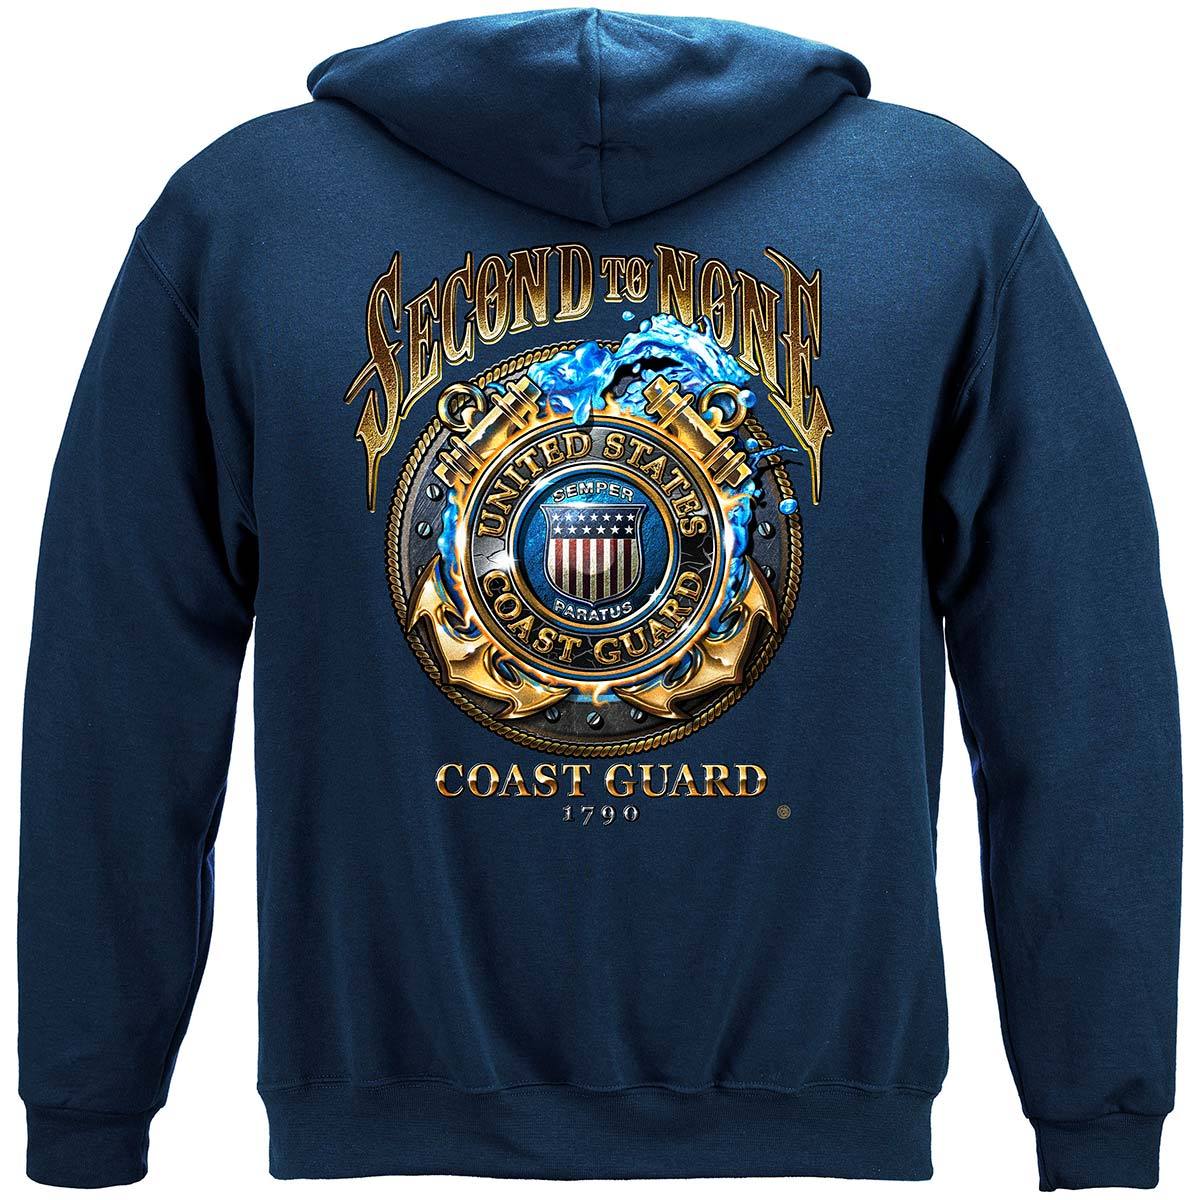 US Coast Guard Second To None Premium Hooded Sweat Shirt